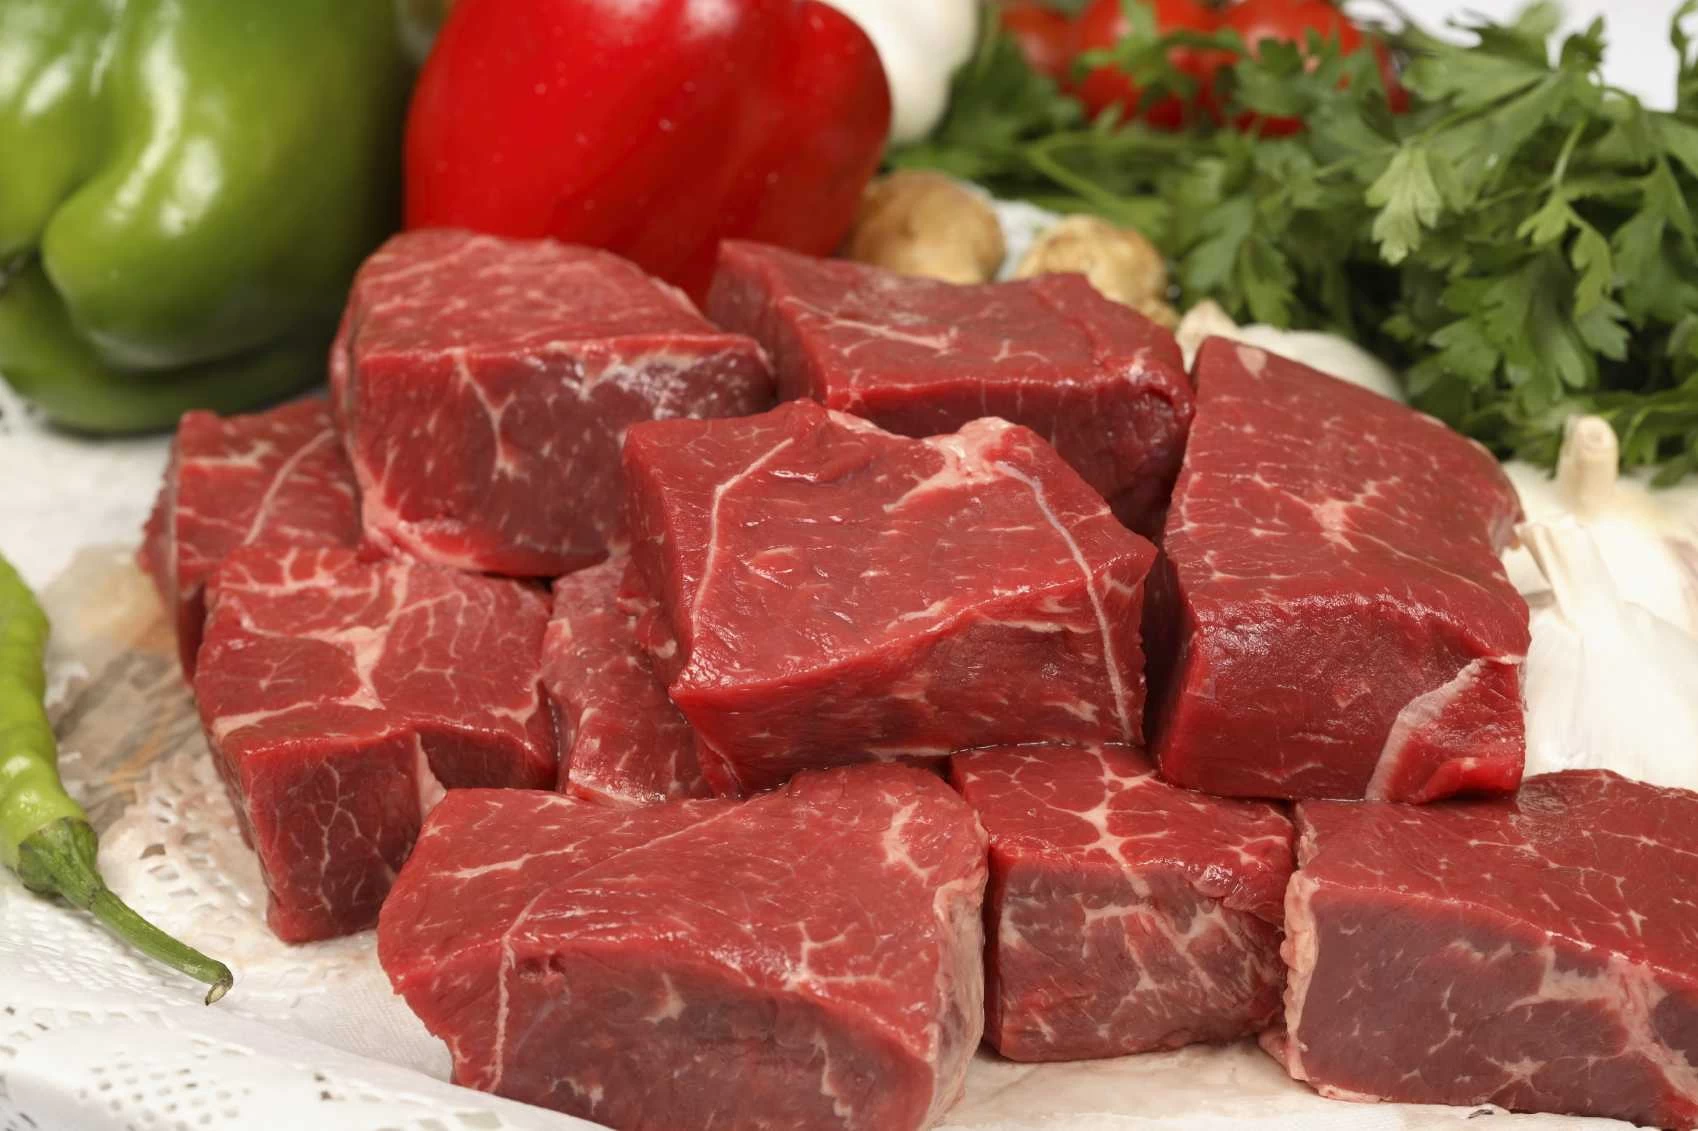 Five reasons you should give up red meat